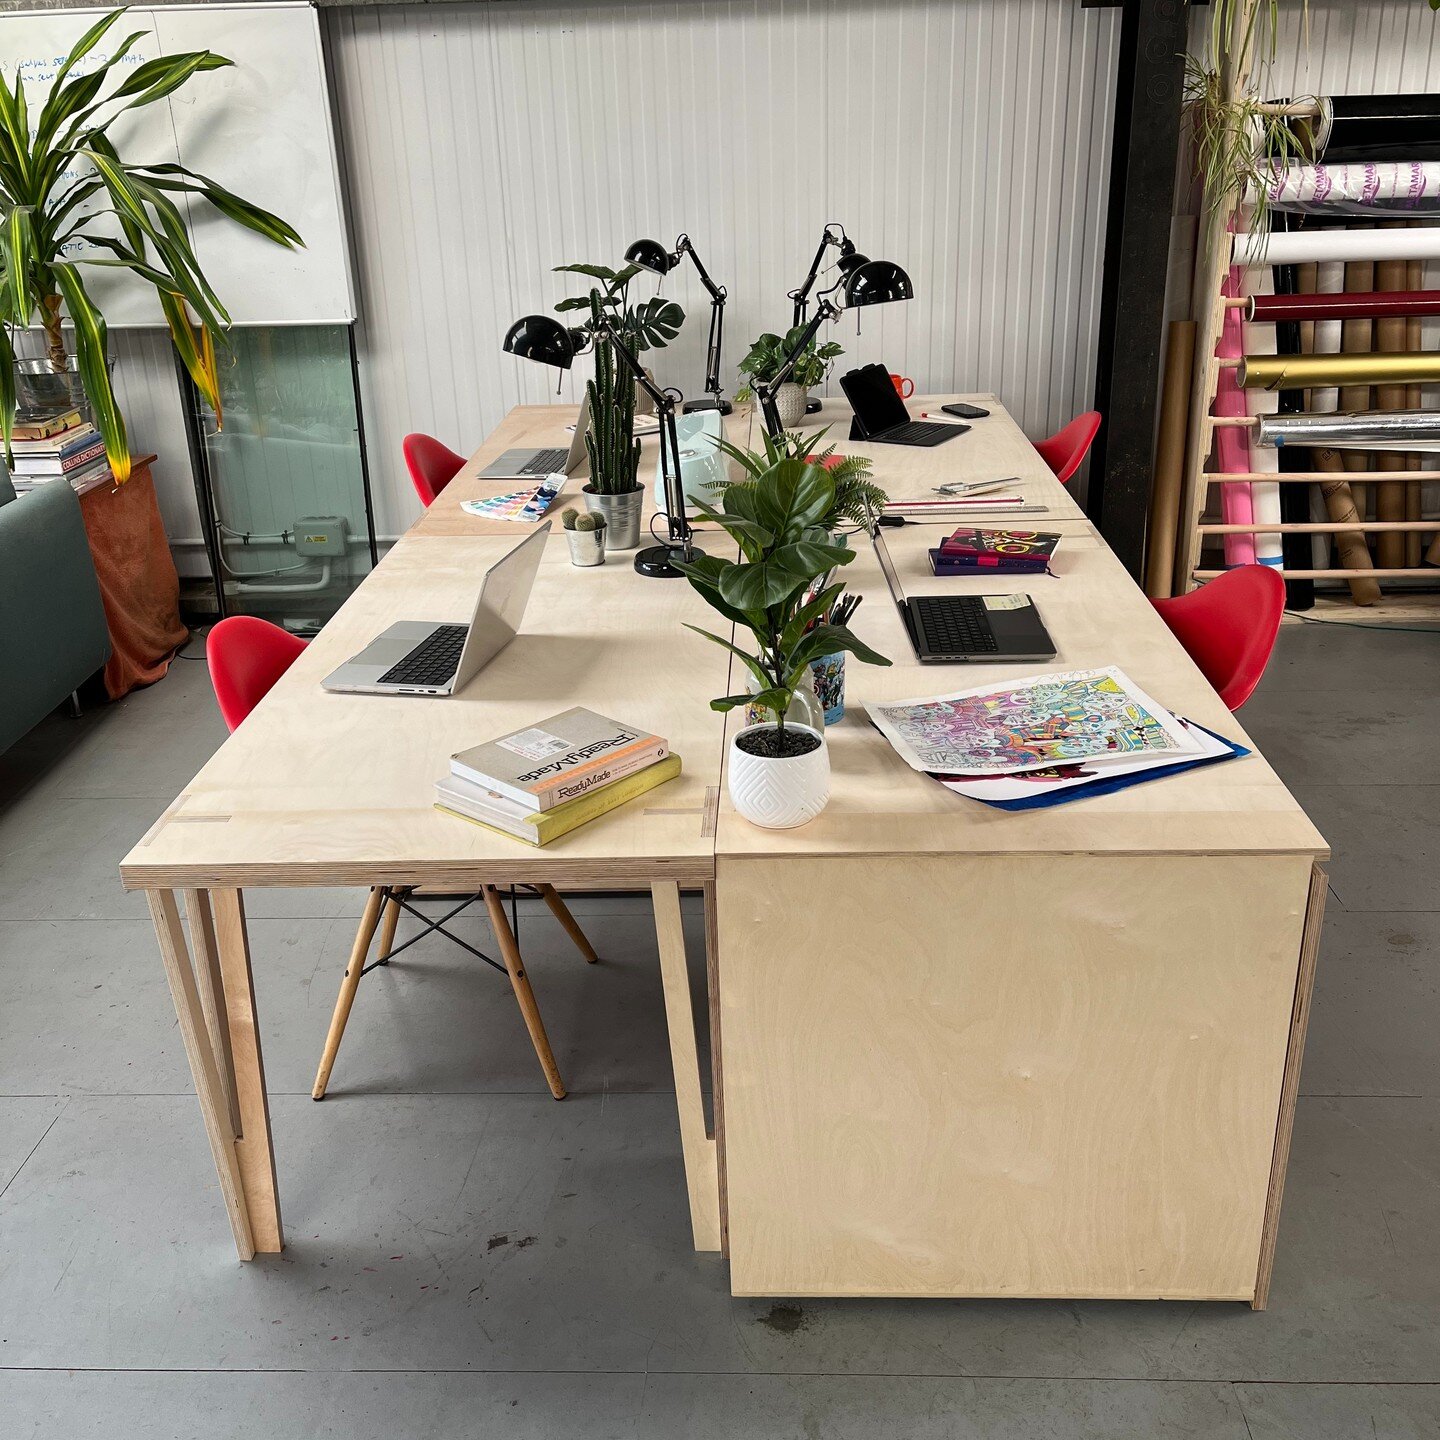 Workspaces available for 2023
Get in touch if you&rsquo;d like to hire a desk at Create 180. Includes power, wifi and kitchen access.
Based in Greenwich between Ikea and Greenwich Shopping Park.
If your project requires any CNC, poster printing, viny